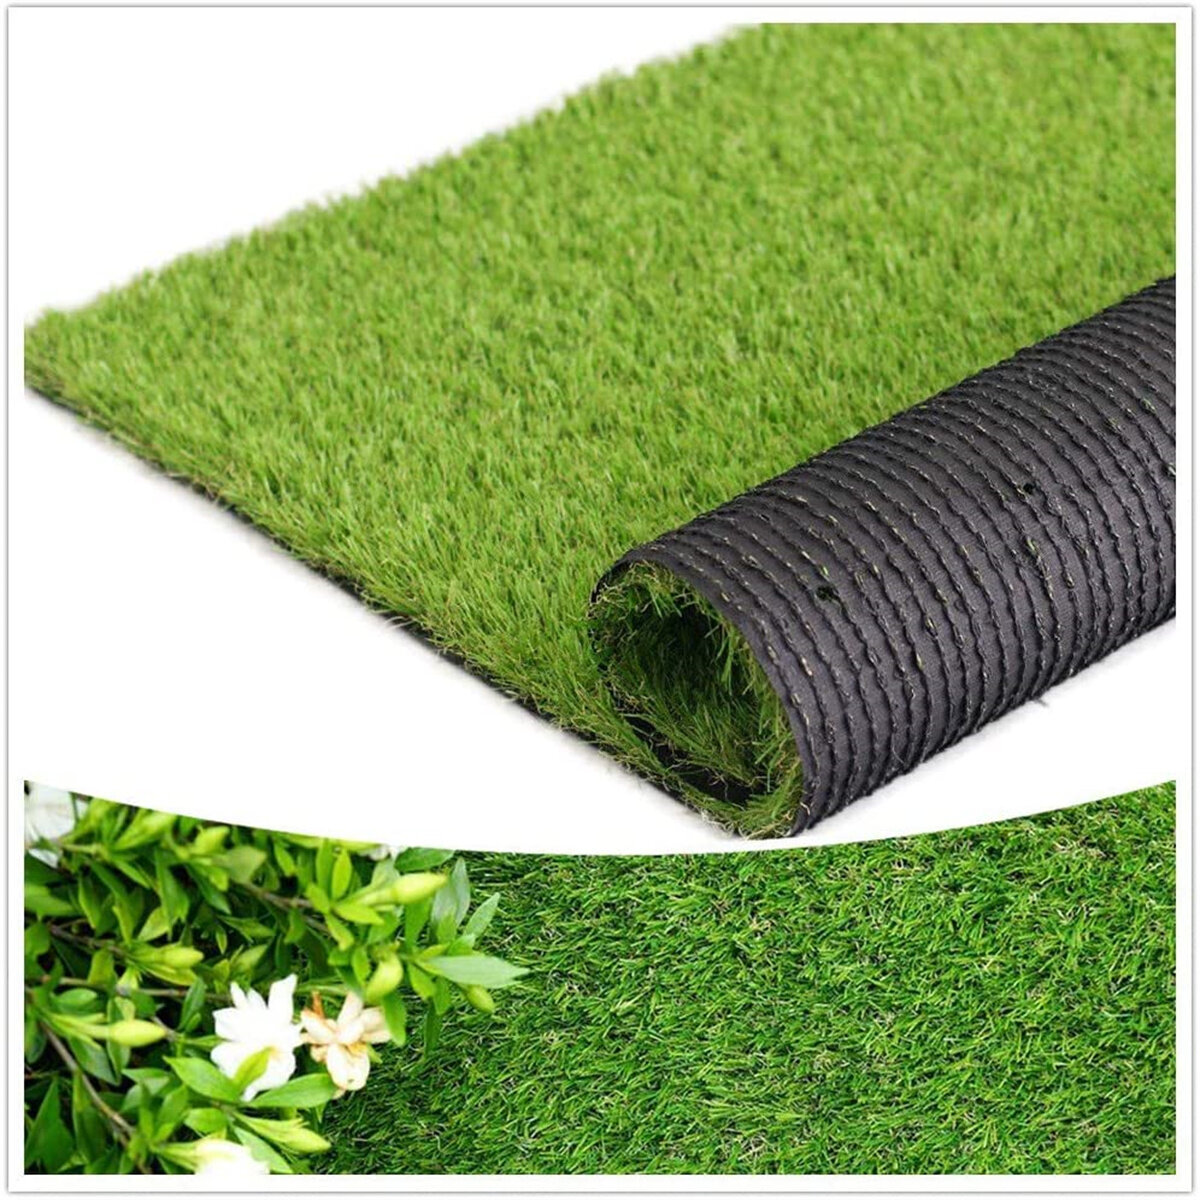 0.7 Custom Sizes Fas Home Artificial Grass Turf -8FTx8FT Indoor/Outdoor Rug Synthetic Lawn Grass Carpet,Easy Installation Multi-use Astroturf,Pets Dog Turf with Drain Holes 